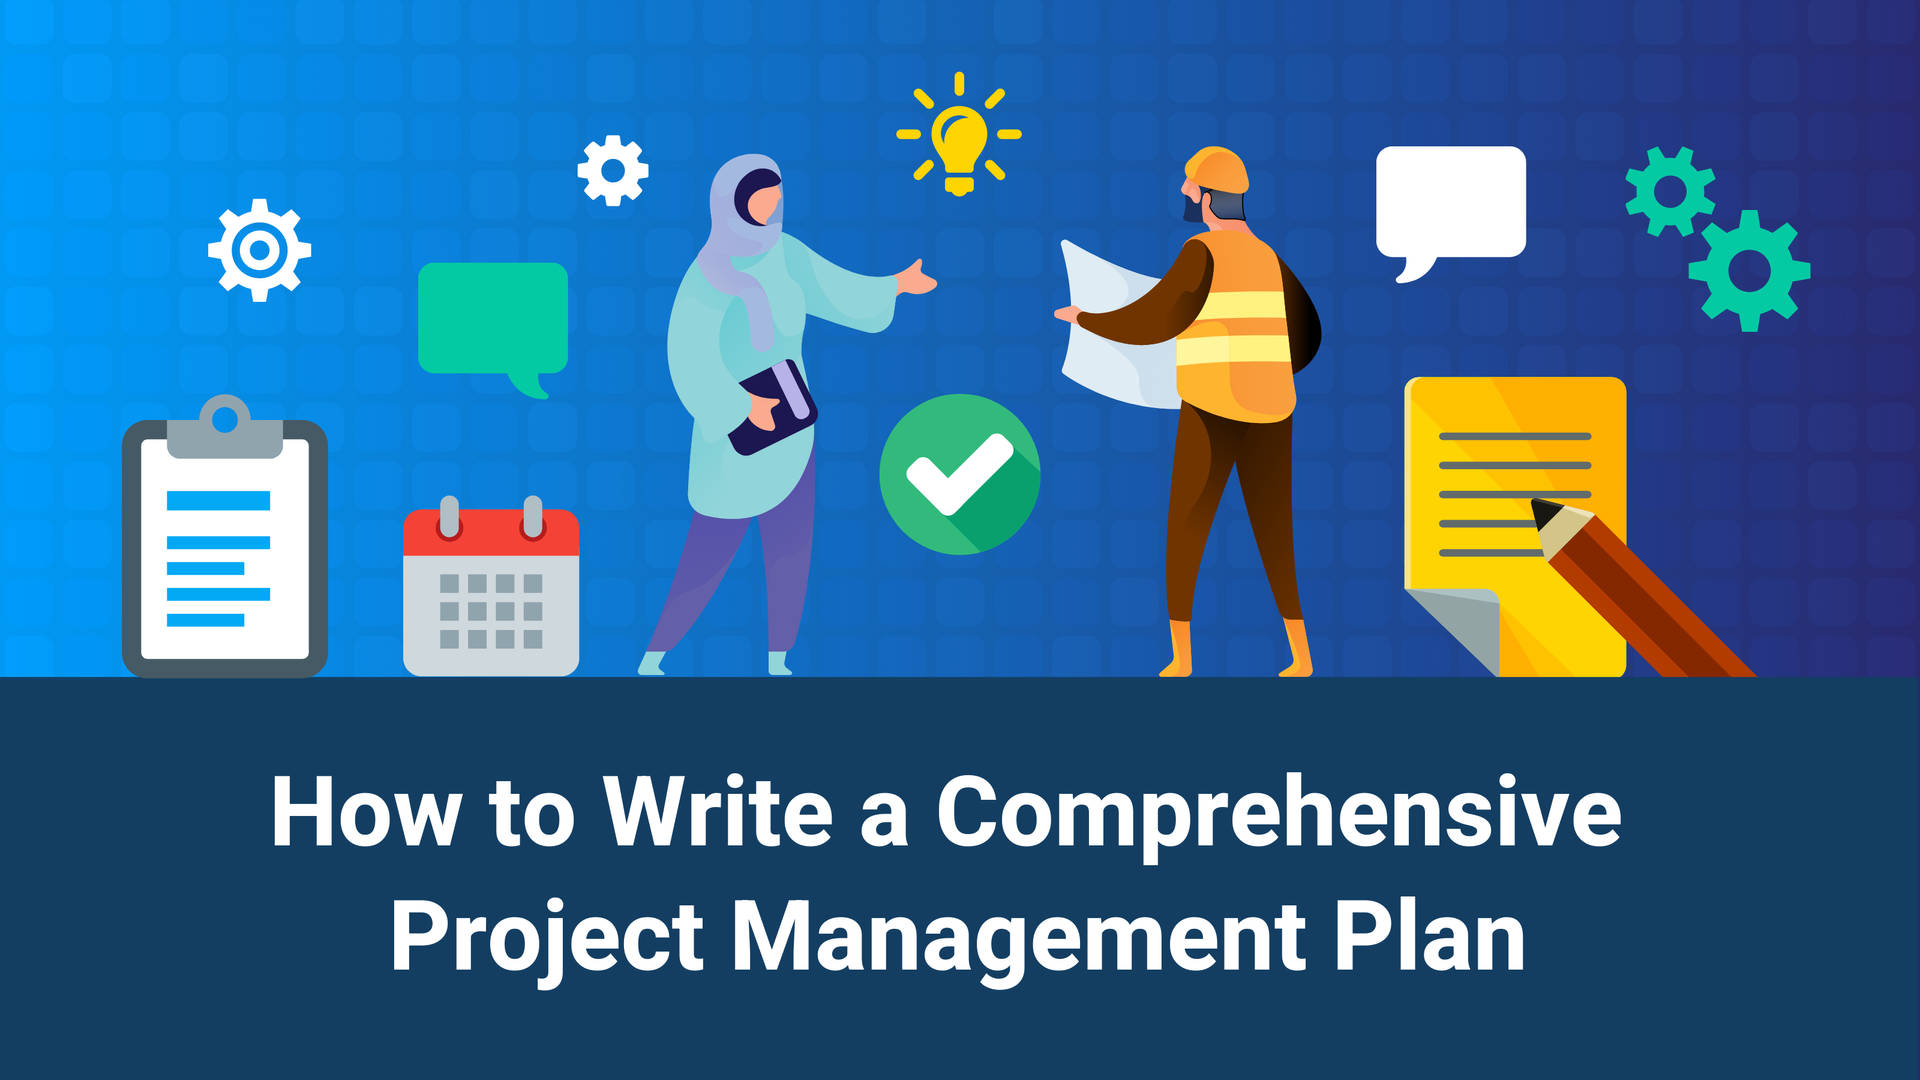 Comprehensive Project Management Plan Writing Guide Wallpaper